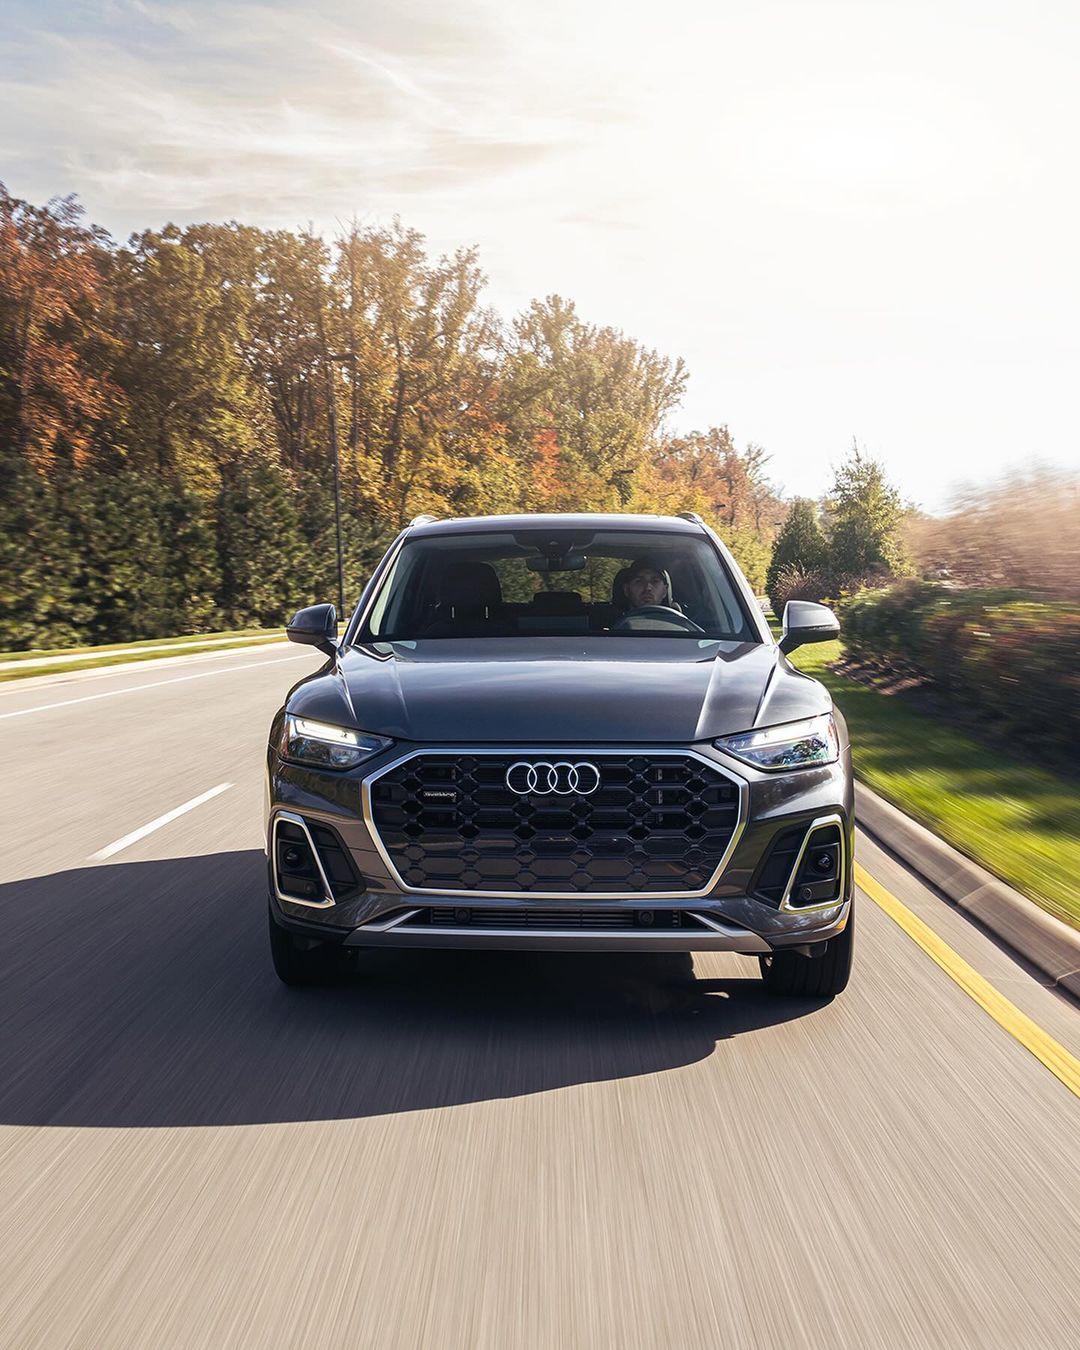 Timeless design, hybrid versatility. Refuse compromise with the #AudiQ5PHEV. Learn more at the link in bio.